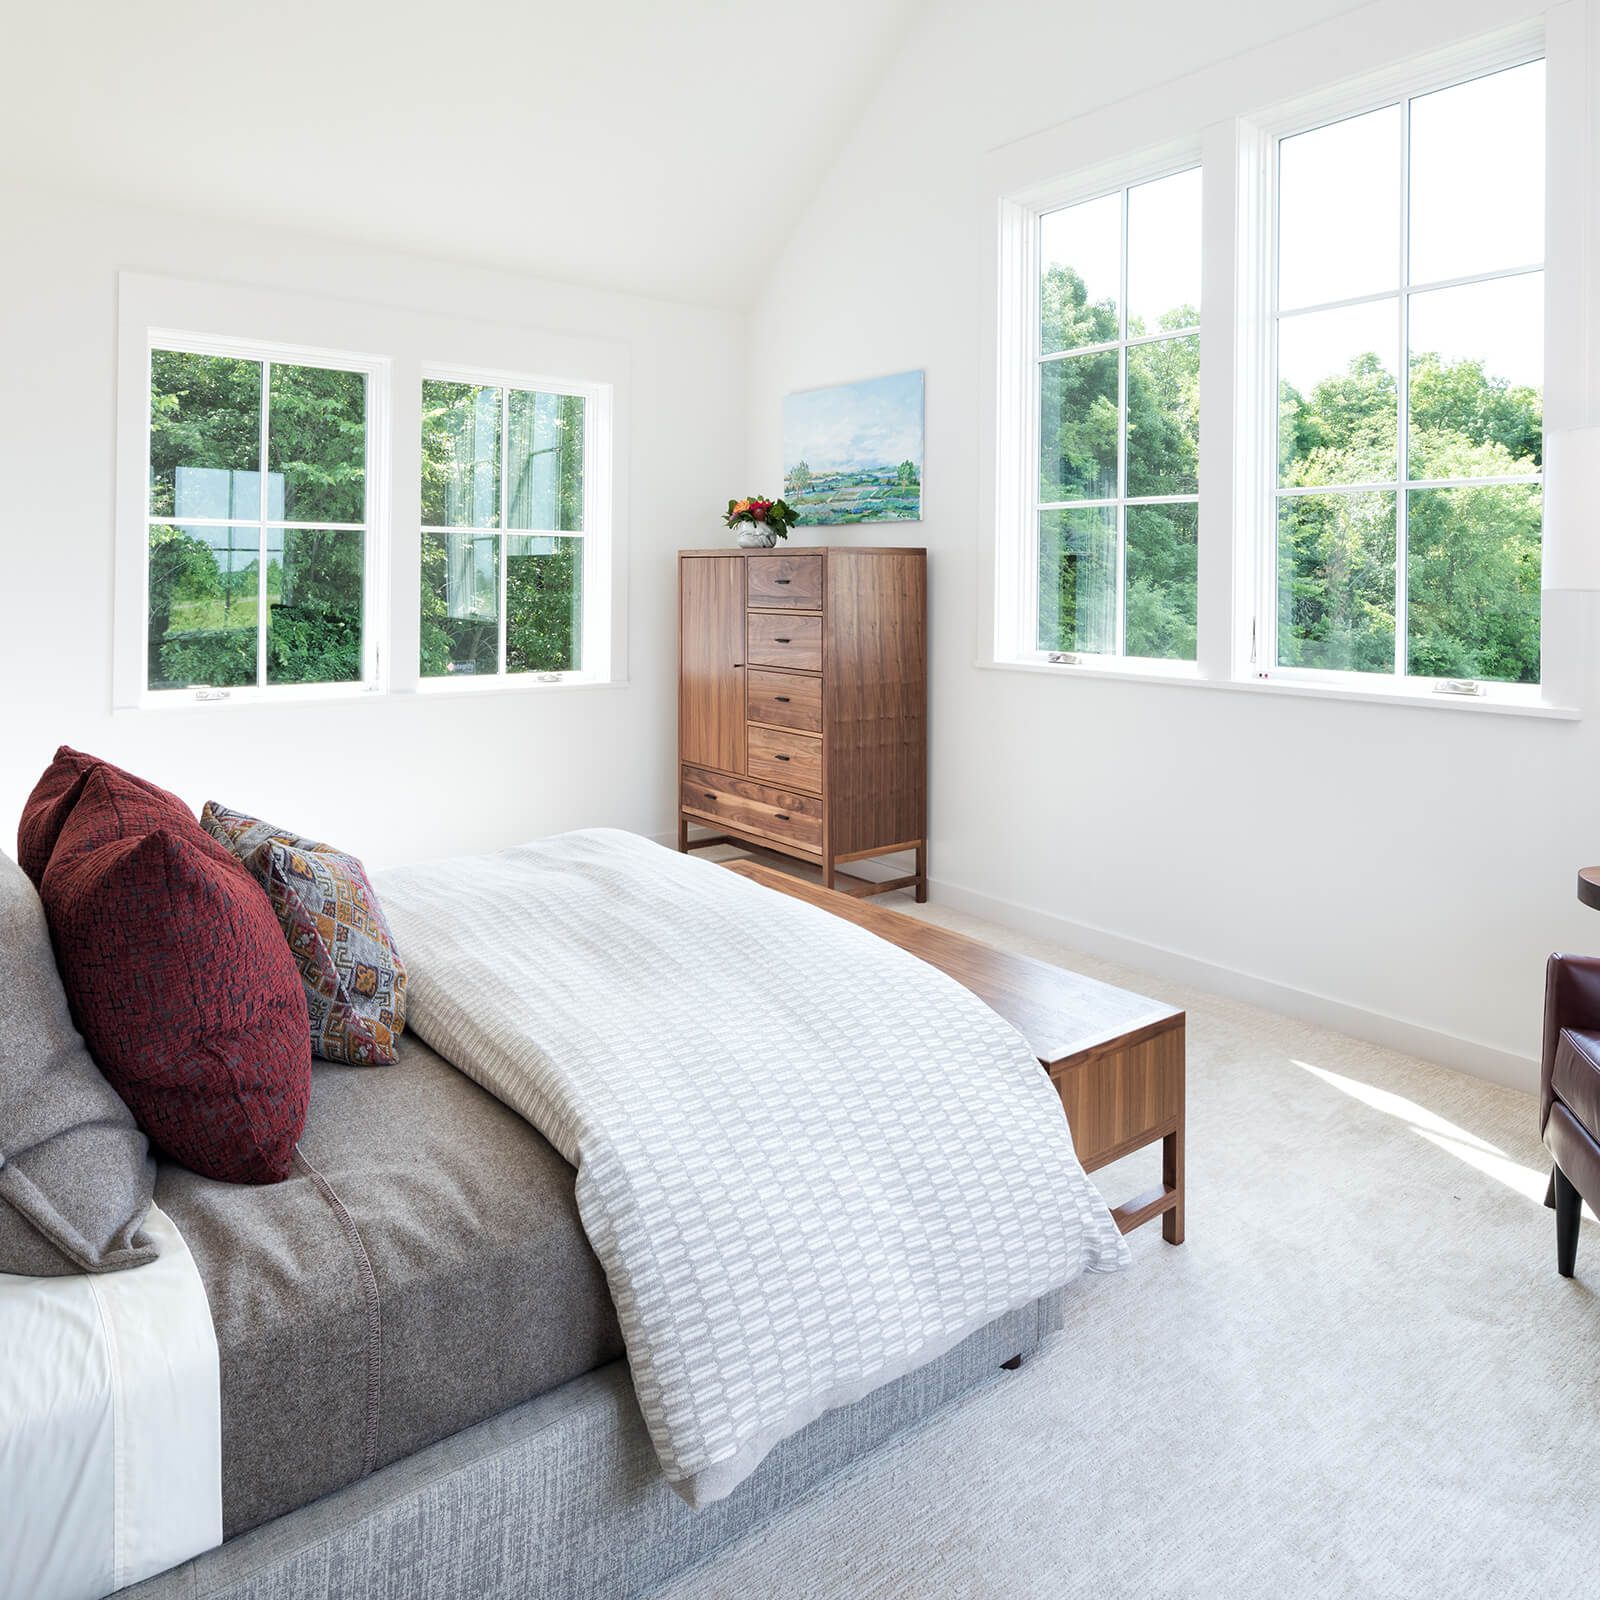 Bedroom with Marvin Elevate Casement Windows and Elevate Awning Windows